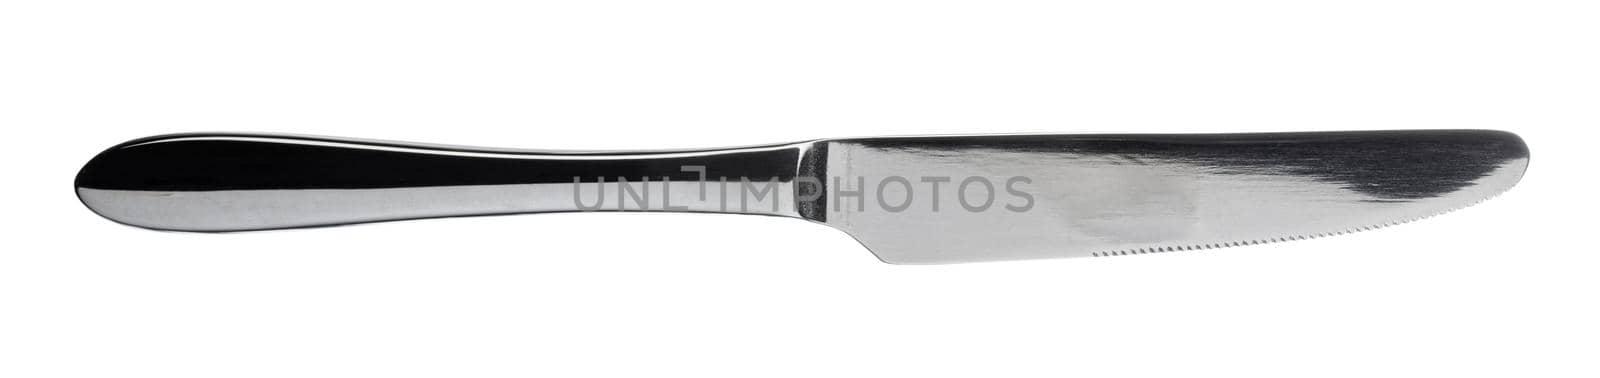 Silver knife silverware isolated on white background